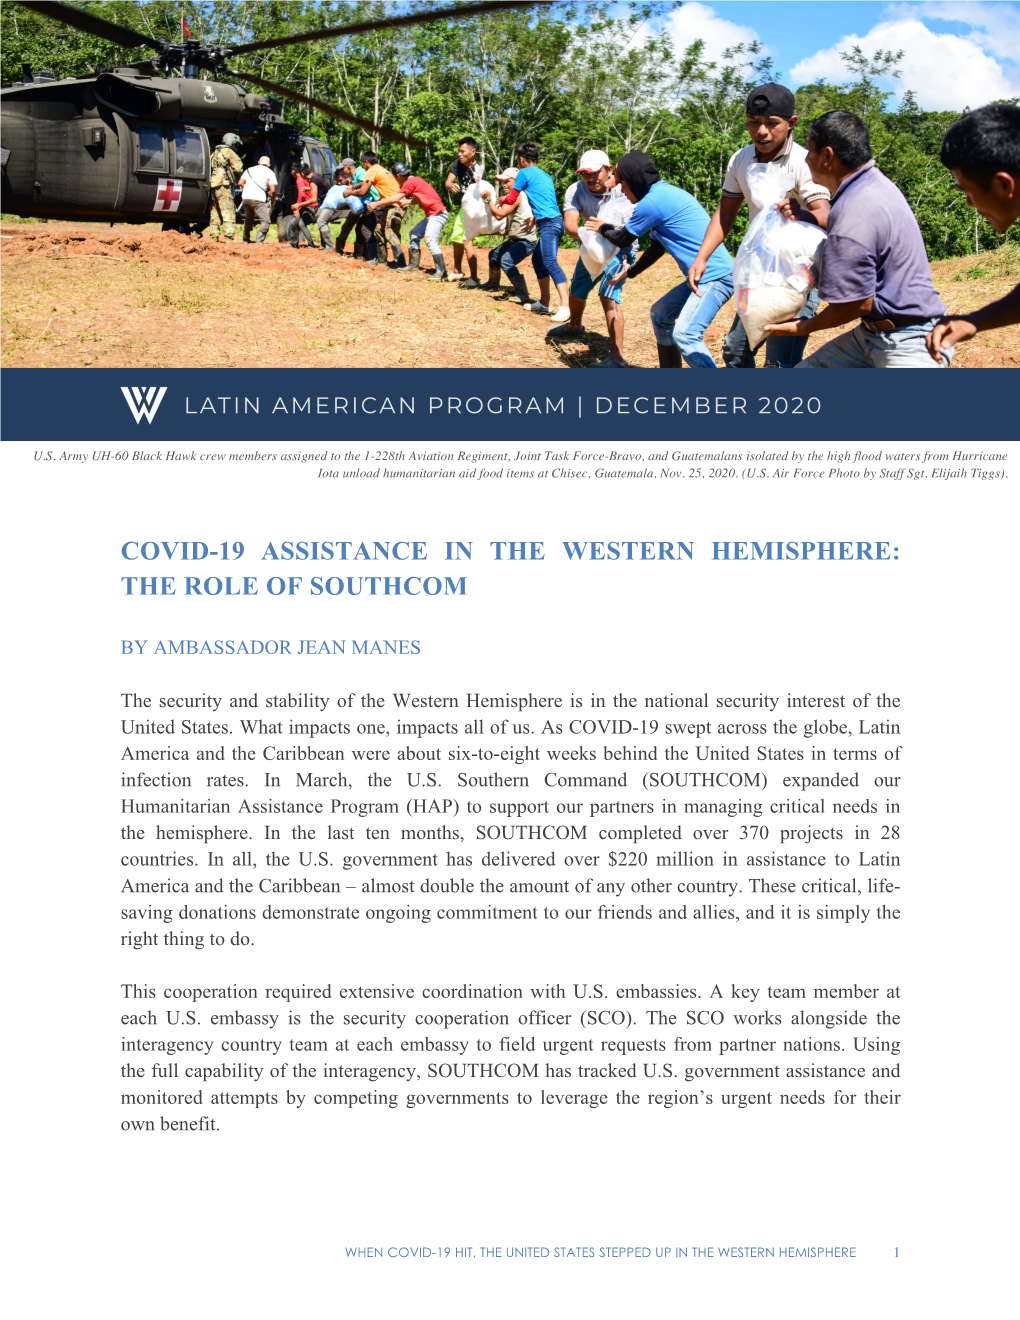 Covid-19 Assistance in the Western Hemisphere: the Role of Southcom